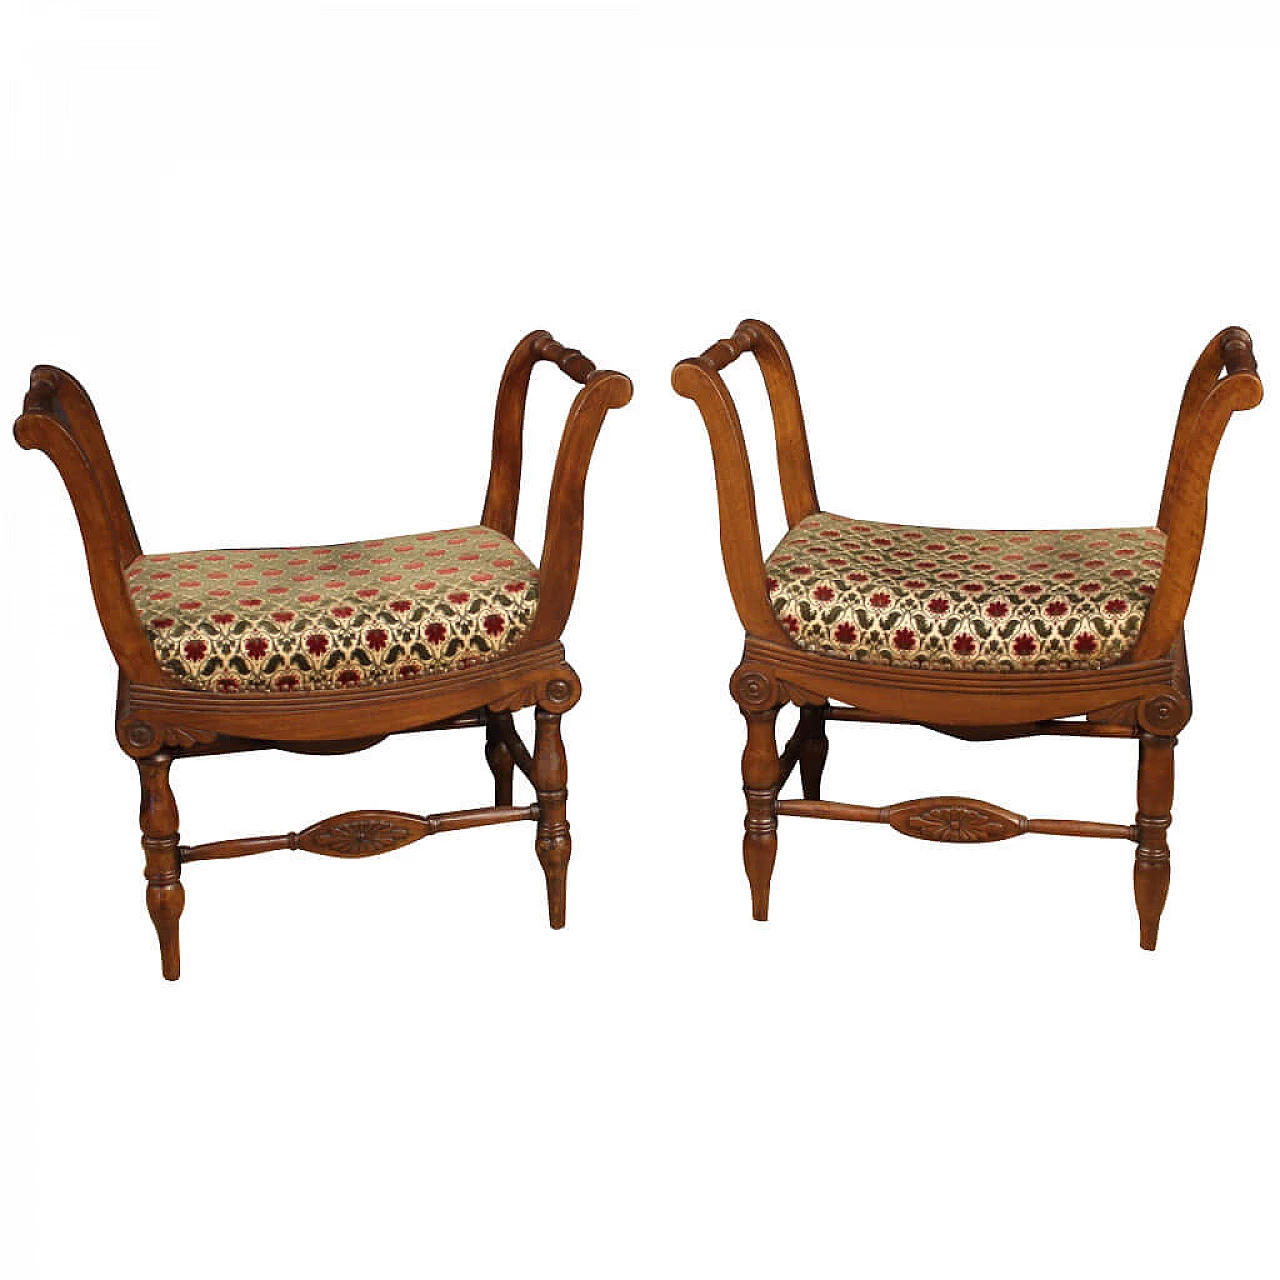 Pair of Charles X benches in carved walnut and floral fabric, 19th century 1116763